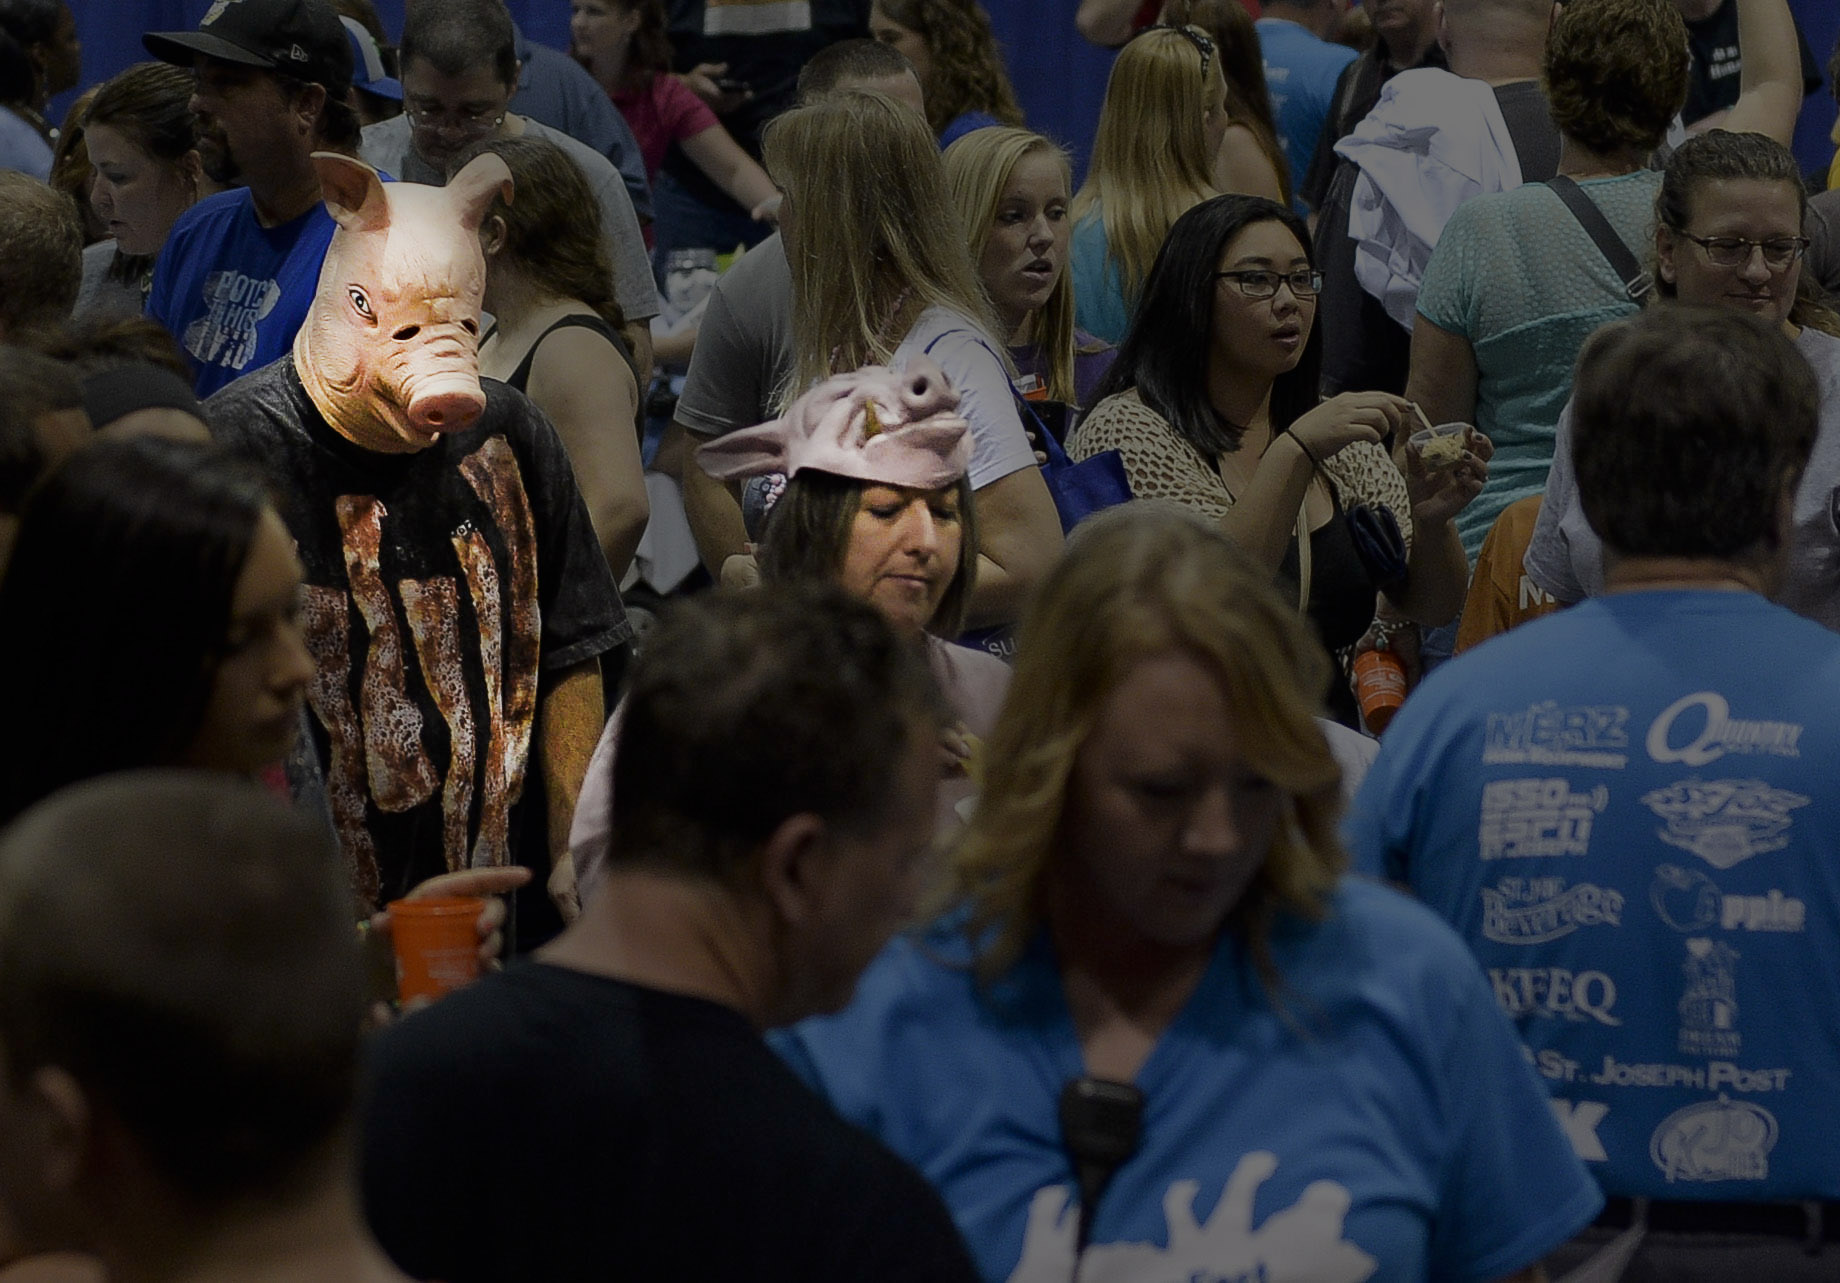   A man wearing a pig mask and a shirt with bacon strips walks through a crowd at the 1st annual BaconFest in St. Joe, Mo on Saturday, Sept. 27, 2014.&nbsp;Over 1,300 people showed up to the event. All the proceeds went to the Dream Factory, an organ